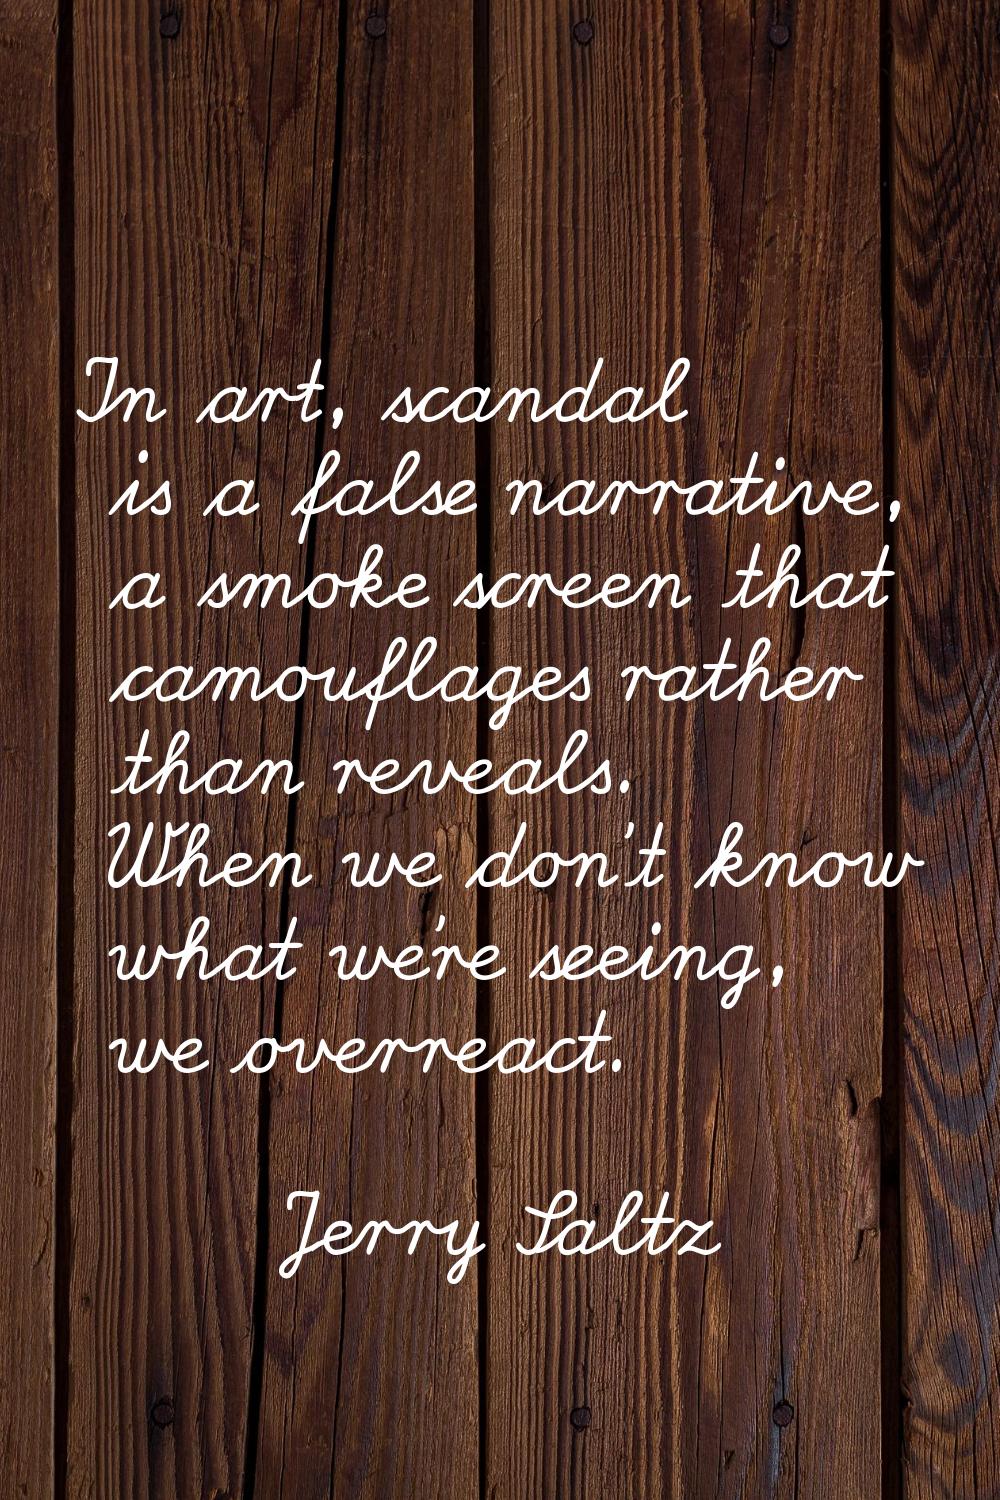 In art, scandal is a false narrative, a smoke screen that camouflages rather than reveals. When we 